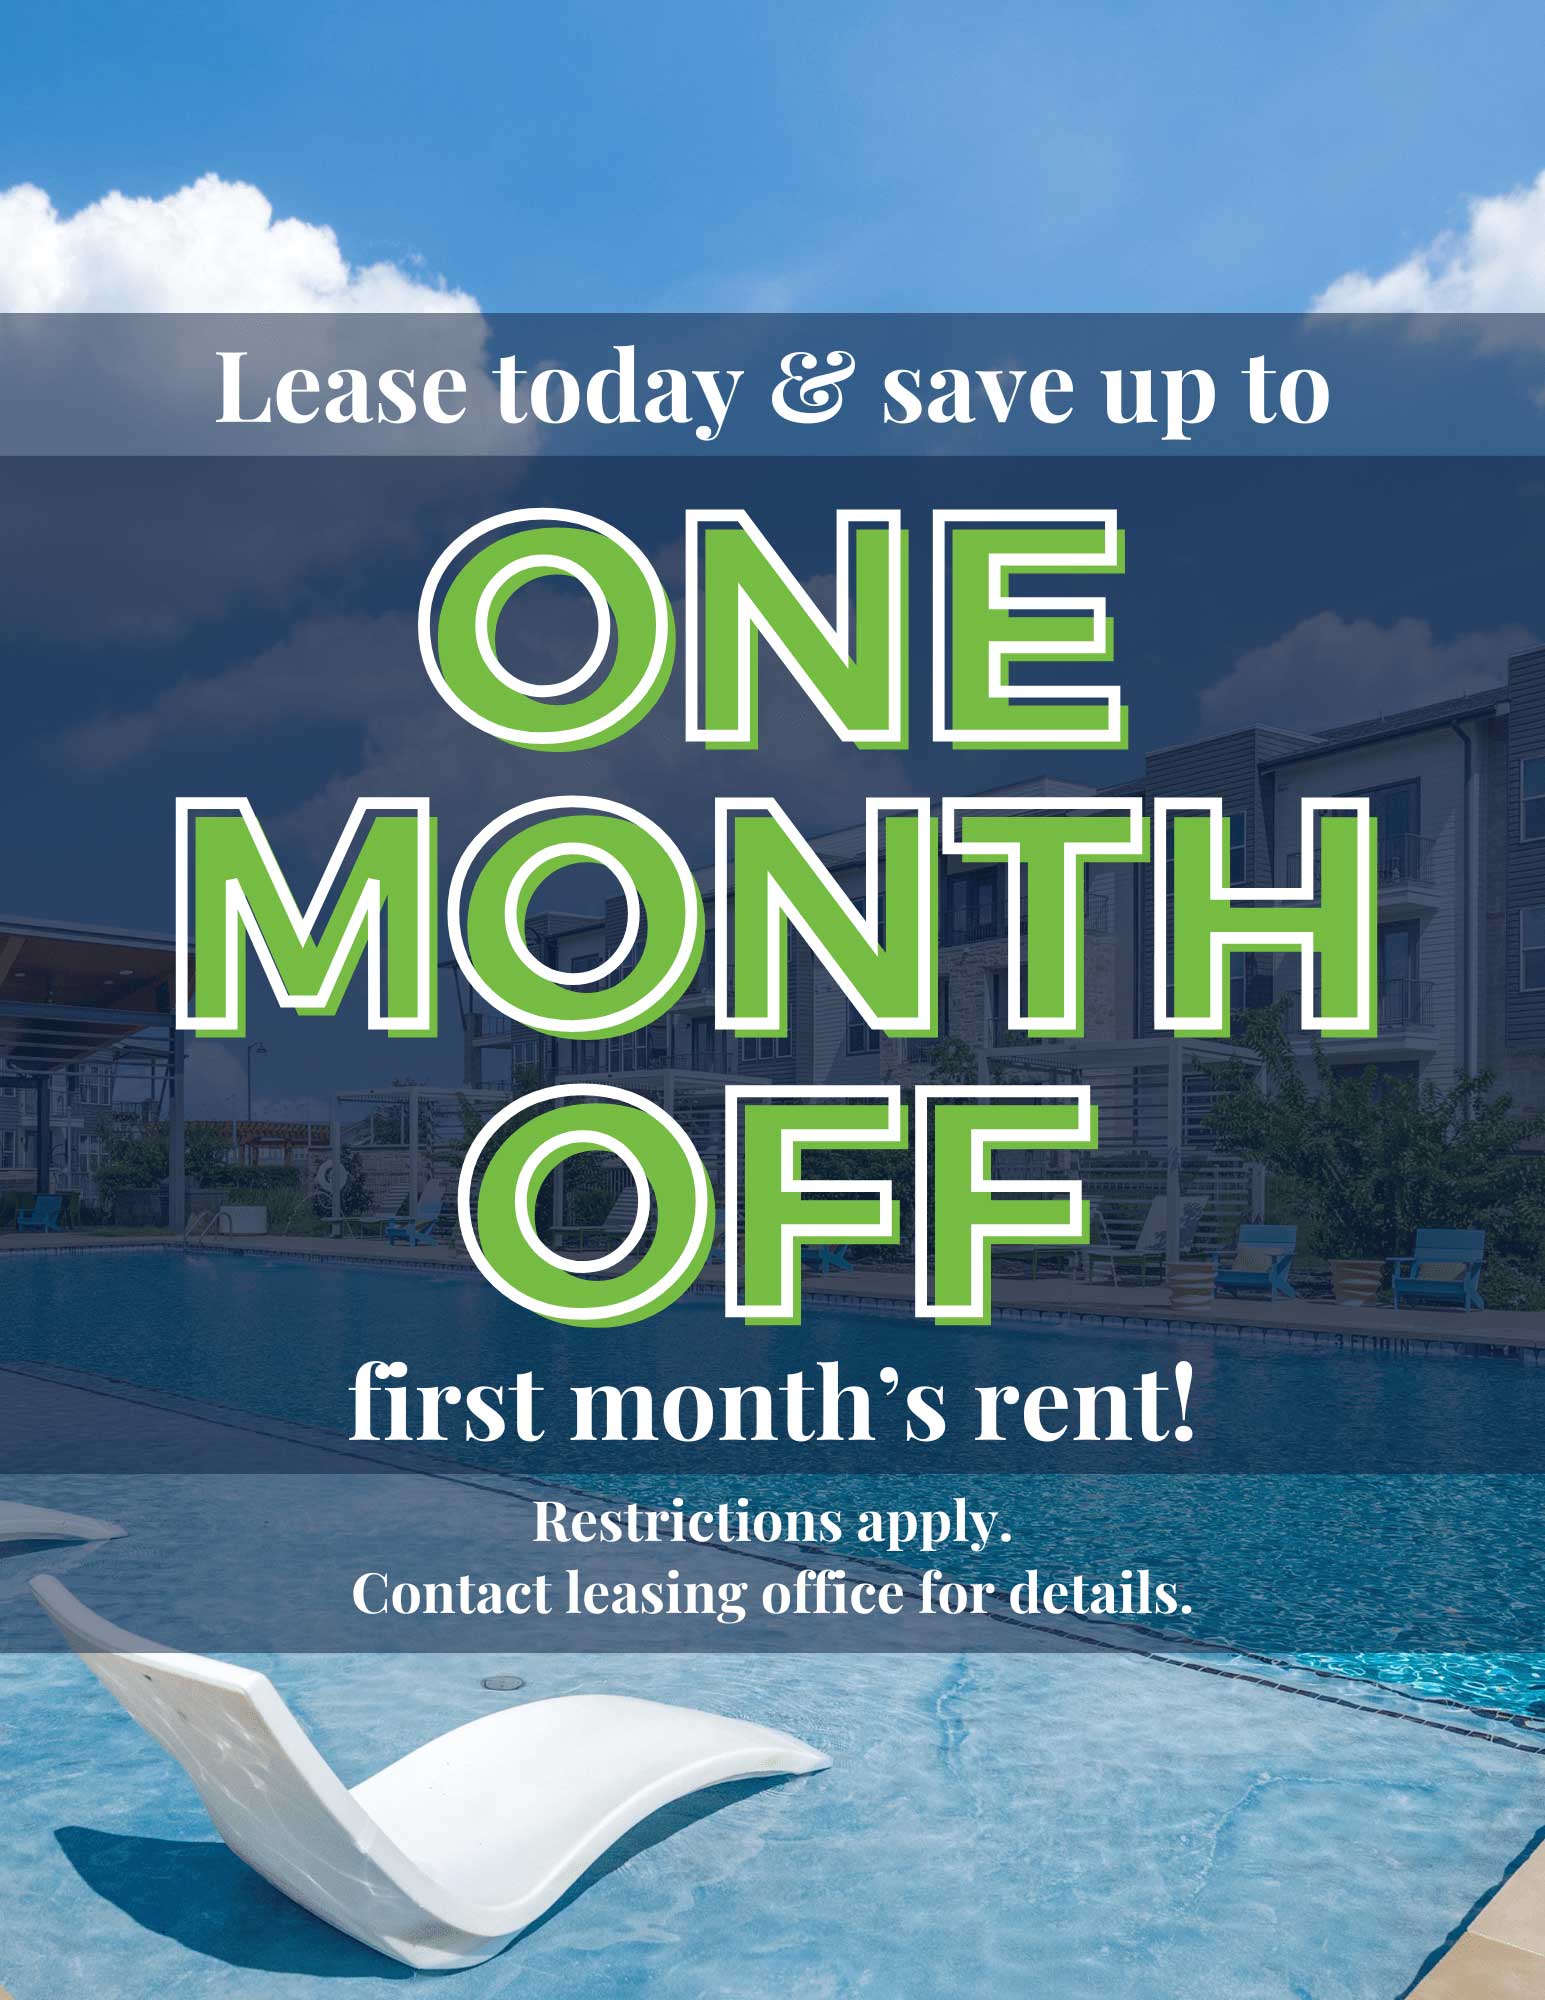 Lease now & get up to 1 month off 1st month's rent - limited time offer!